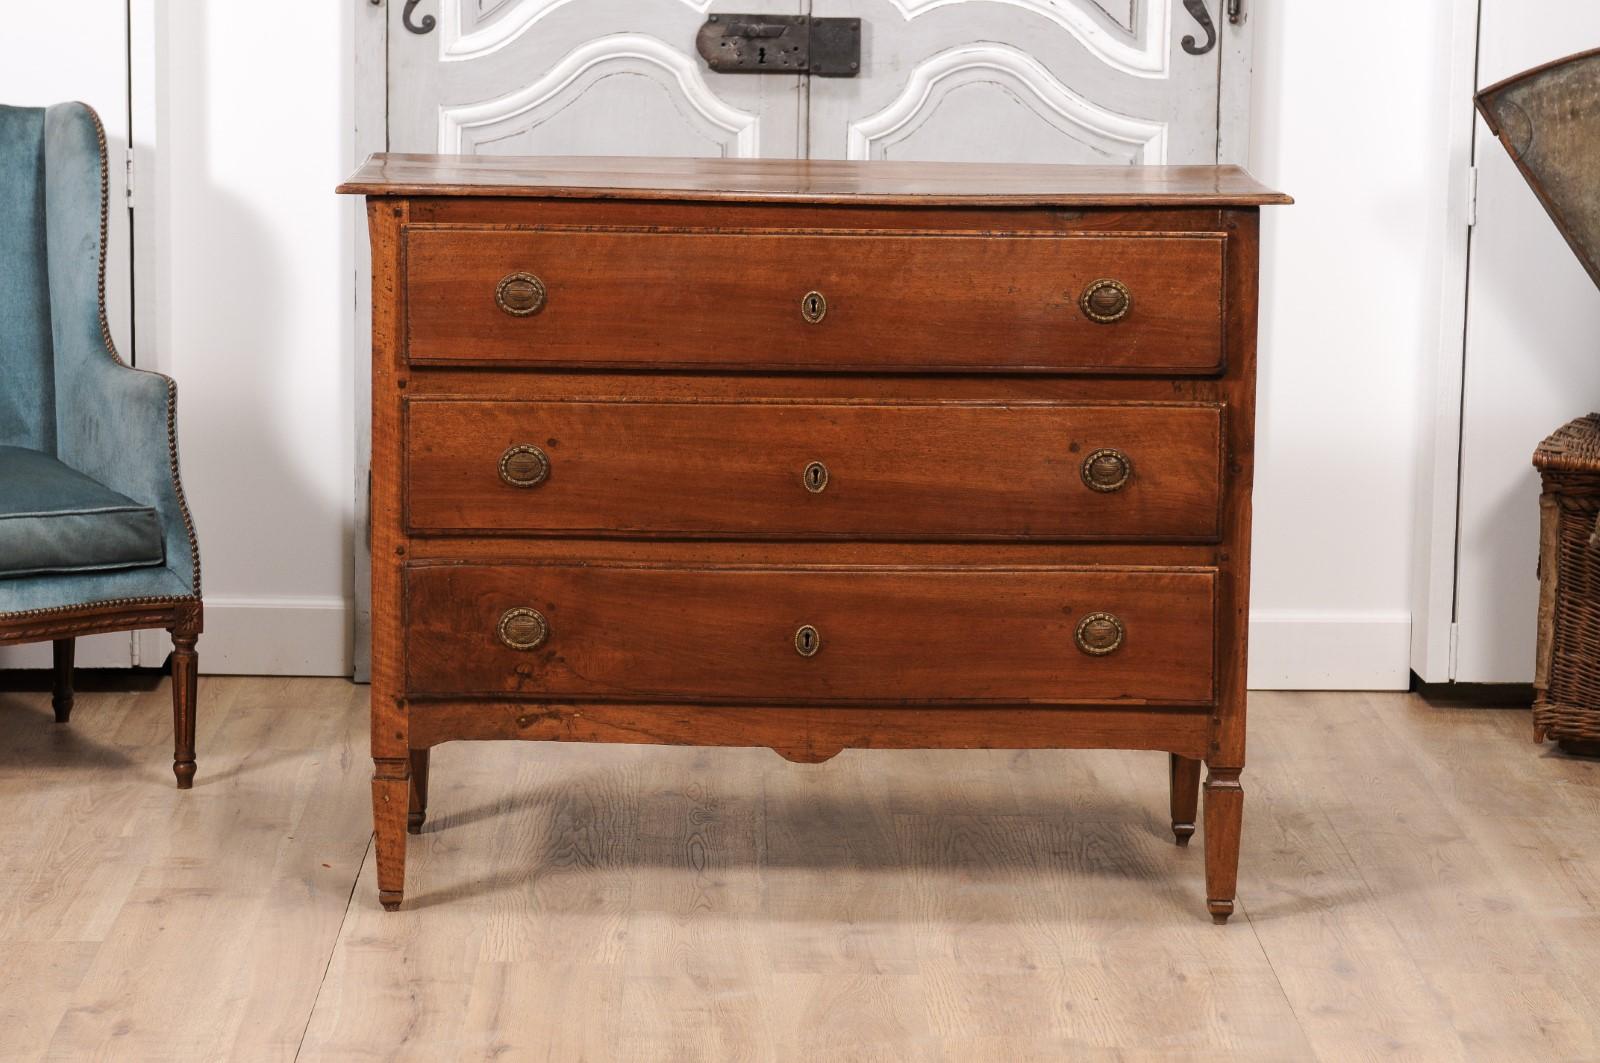 Italian 1820s Serpentine Front Walnut Commode with Three Drawers For Sale 6